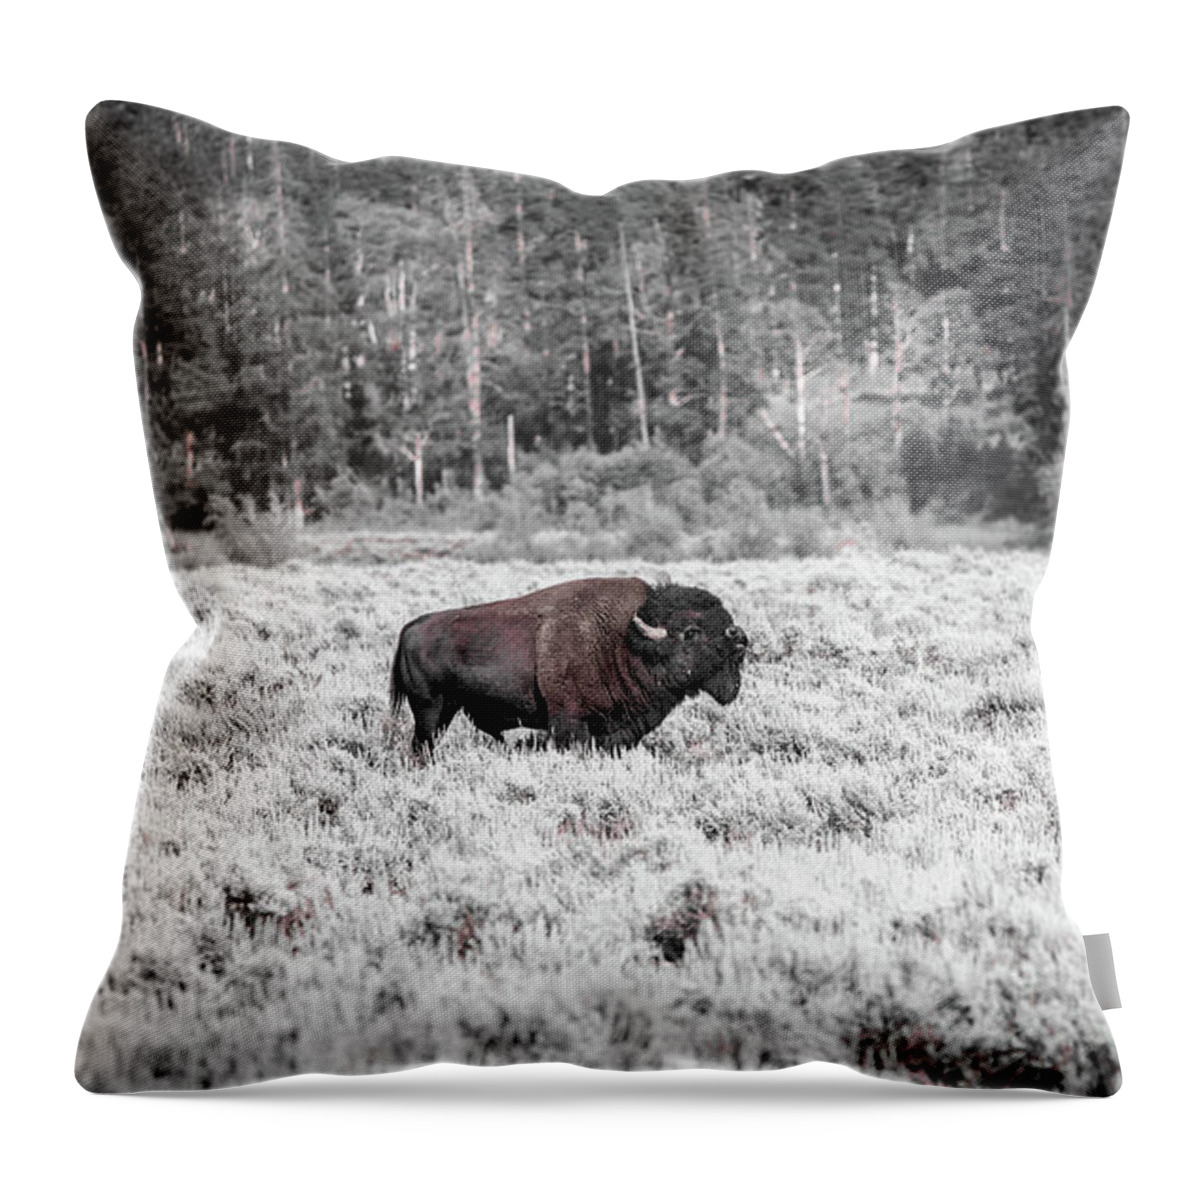 Wildlife Throw Pillow featuring the photograph Roam Free by Dheeraj Mutha